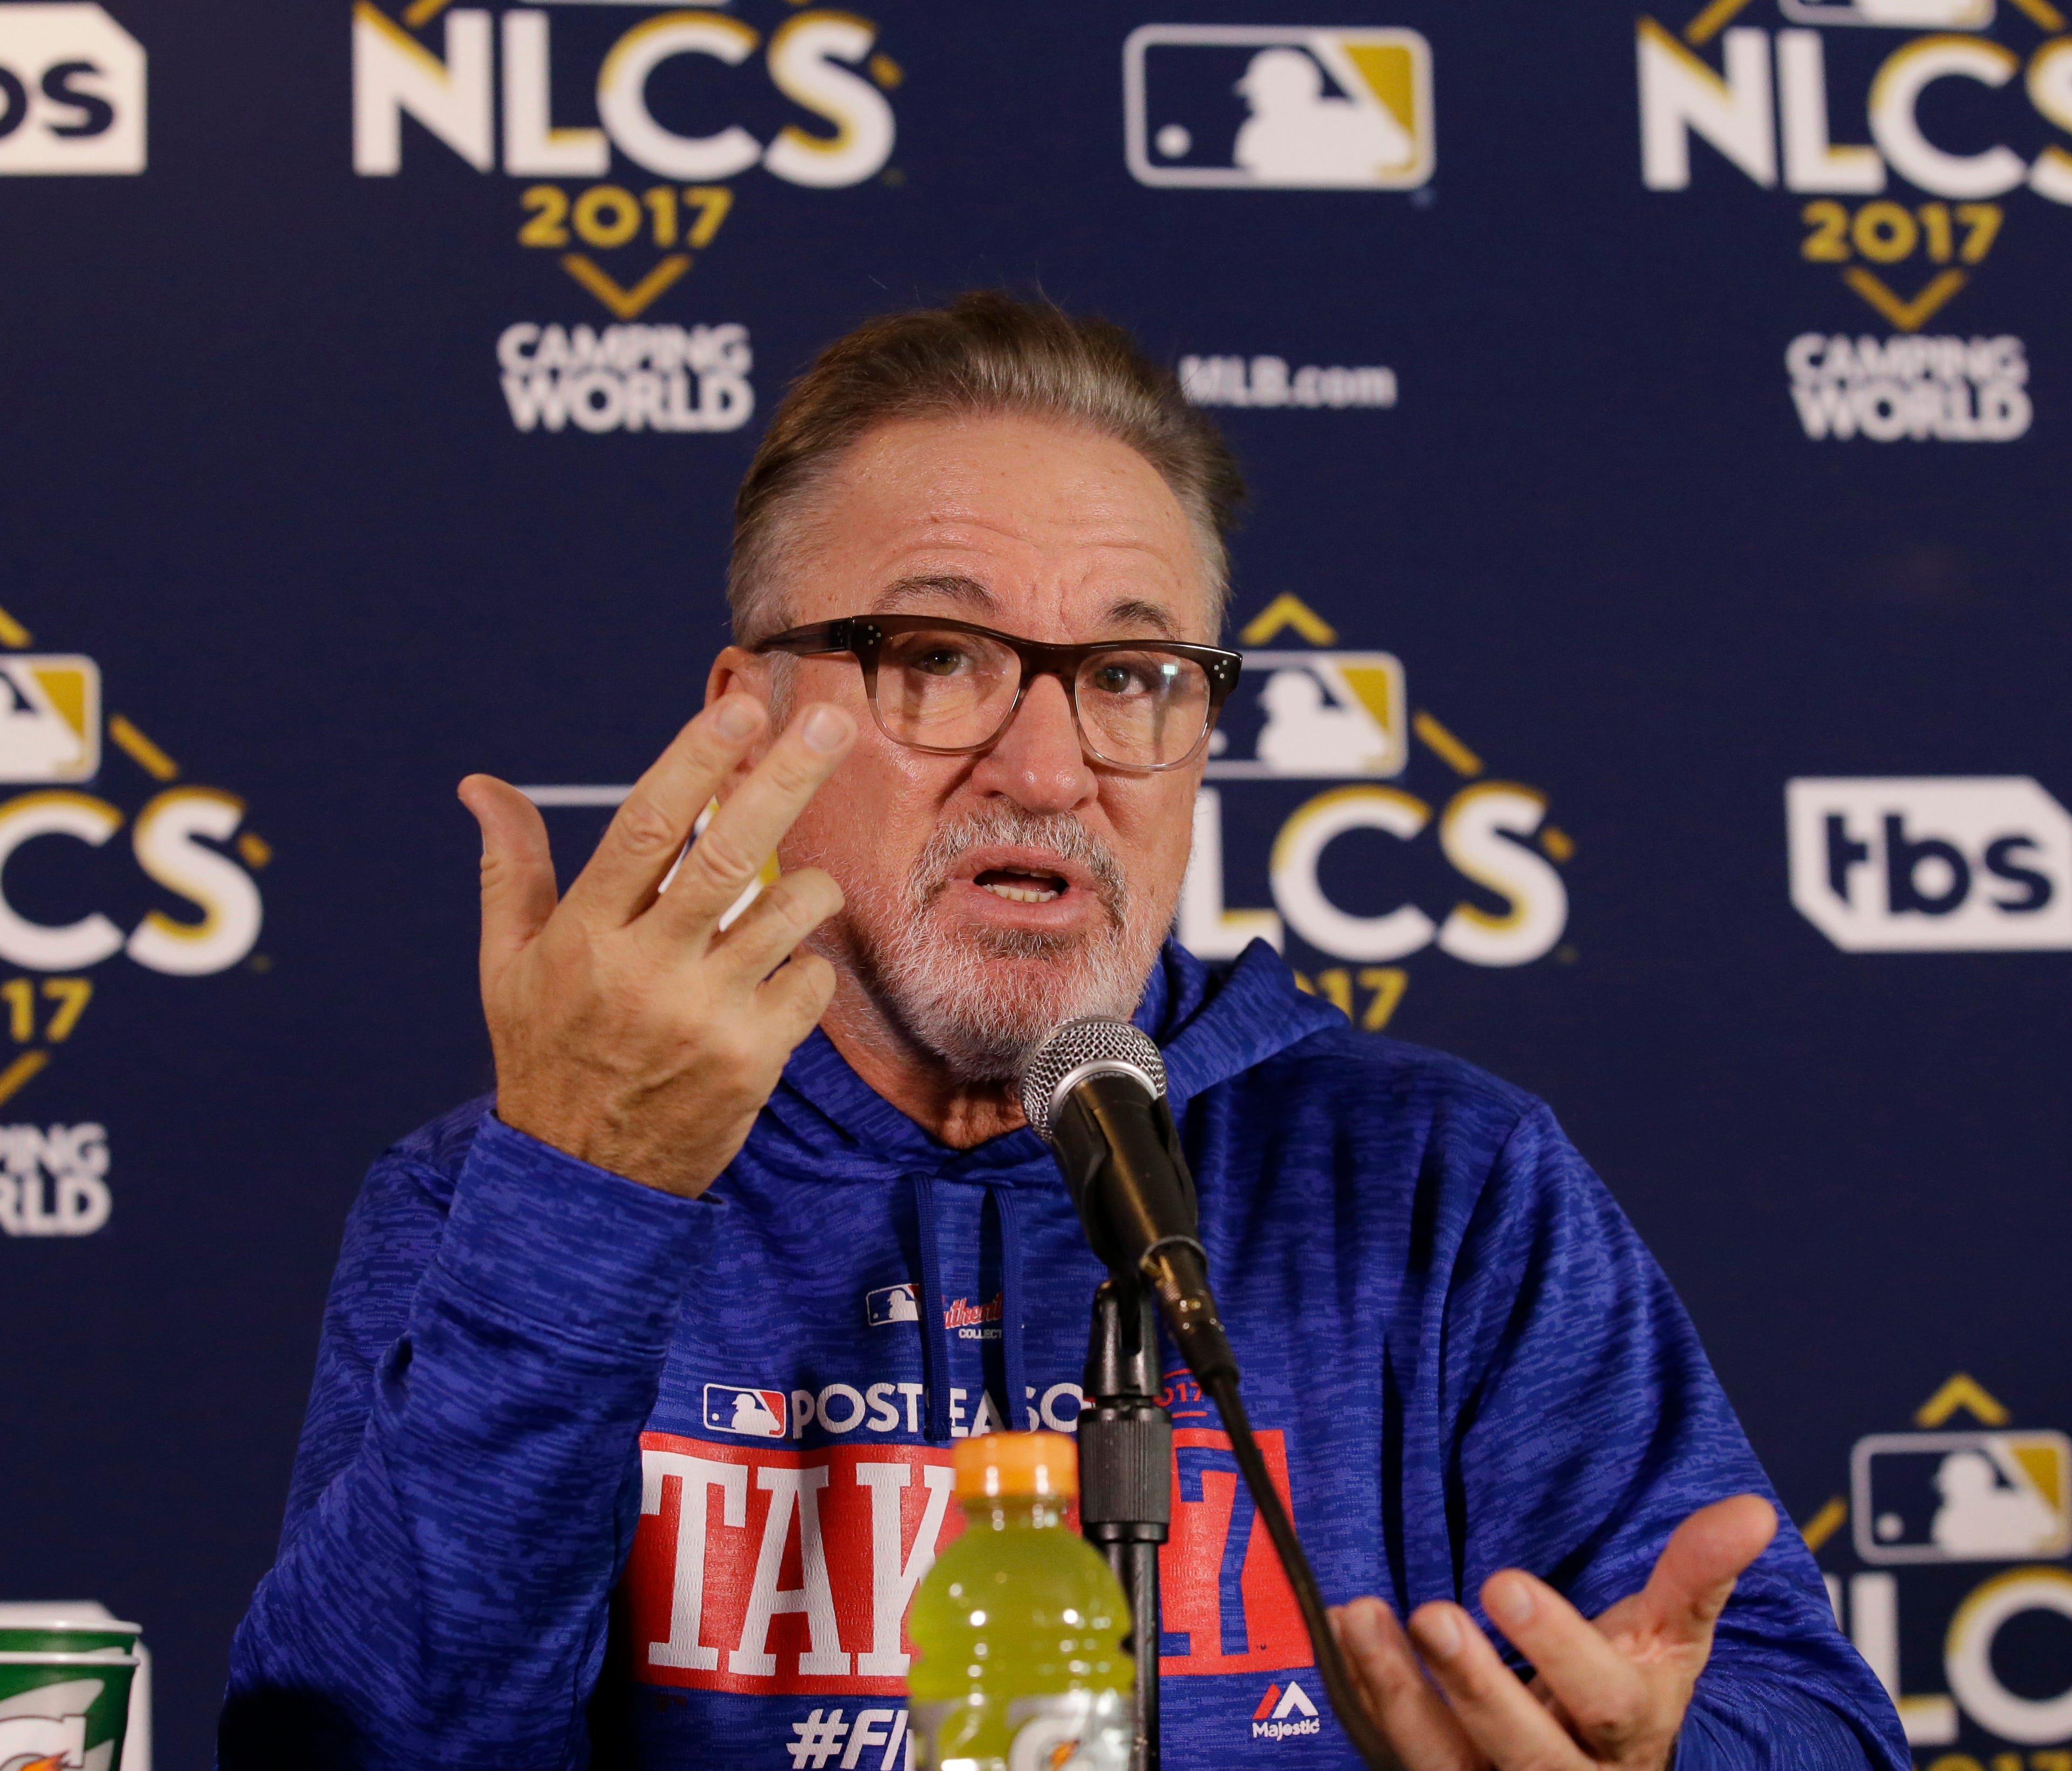 Cubs manager Joe Maddon talks at a news conference in Chicago on Monday.